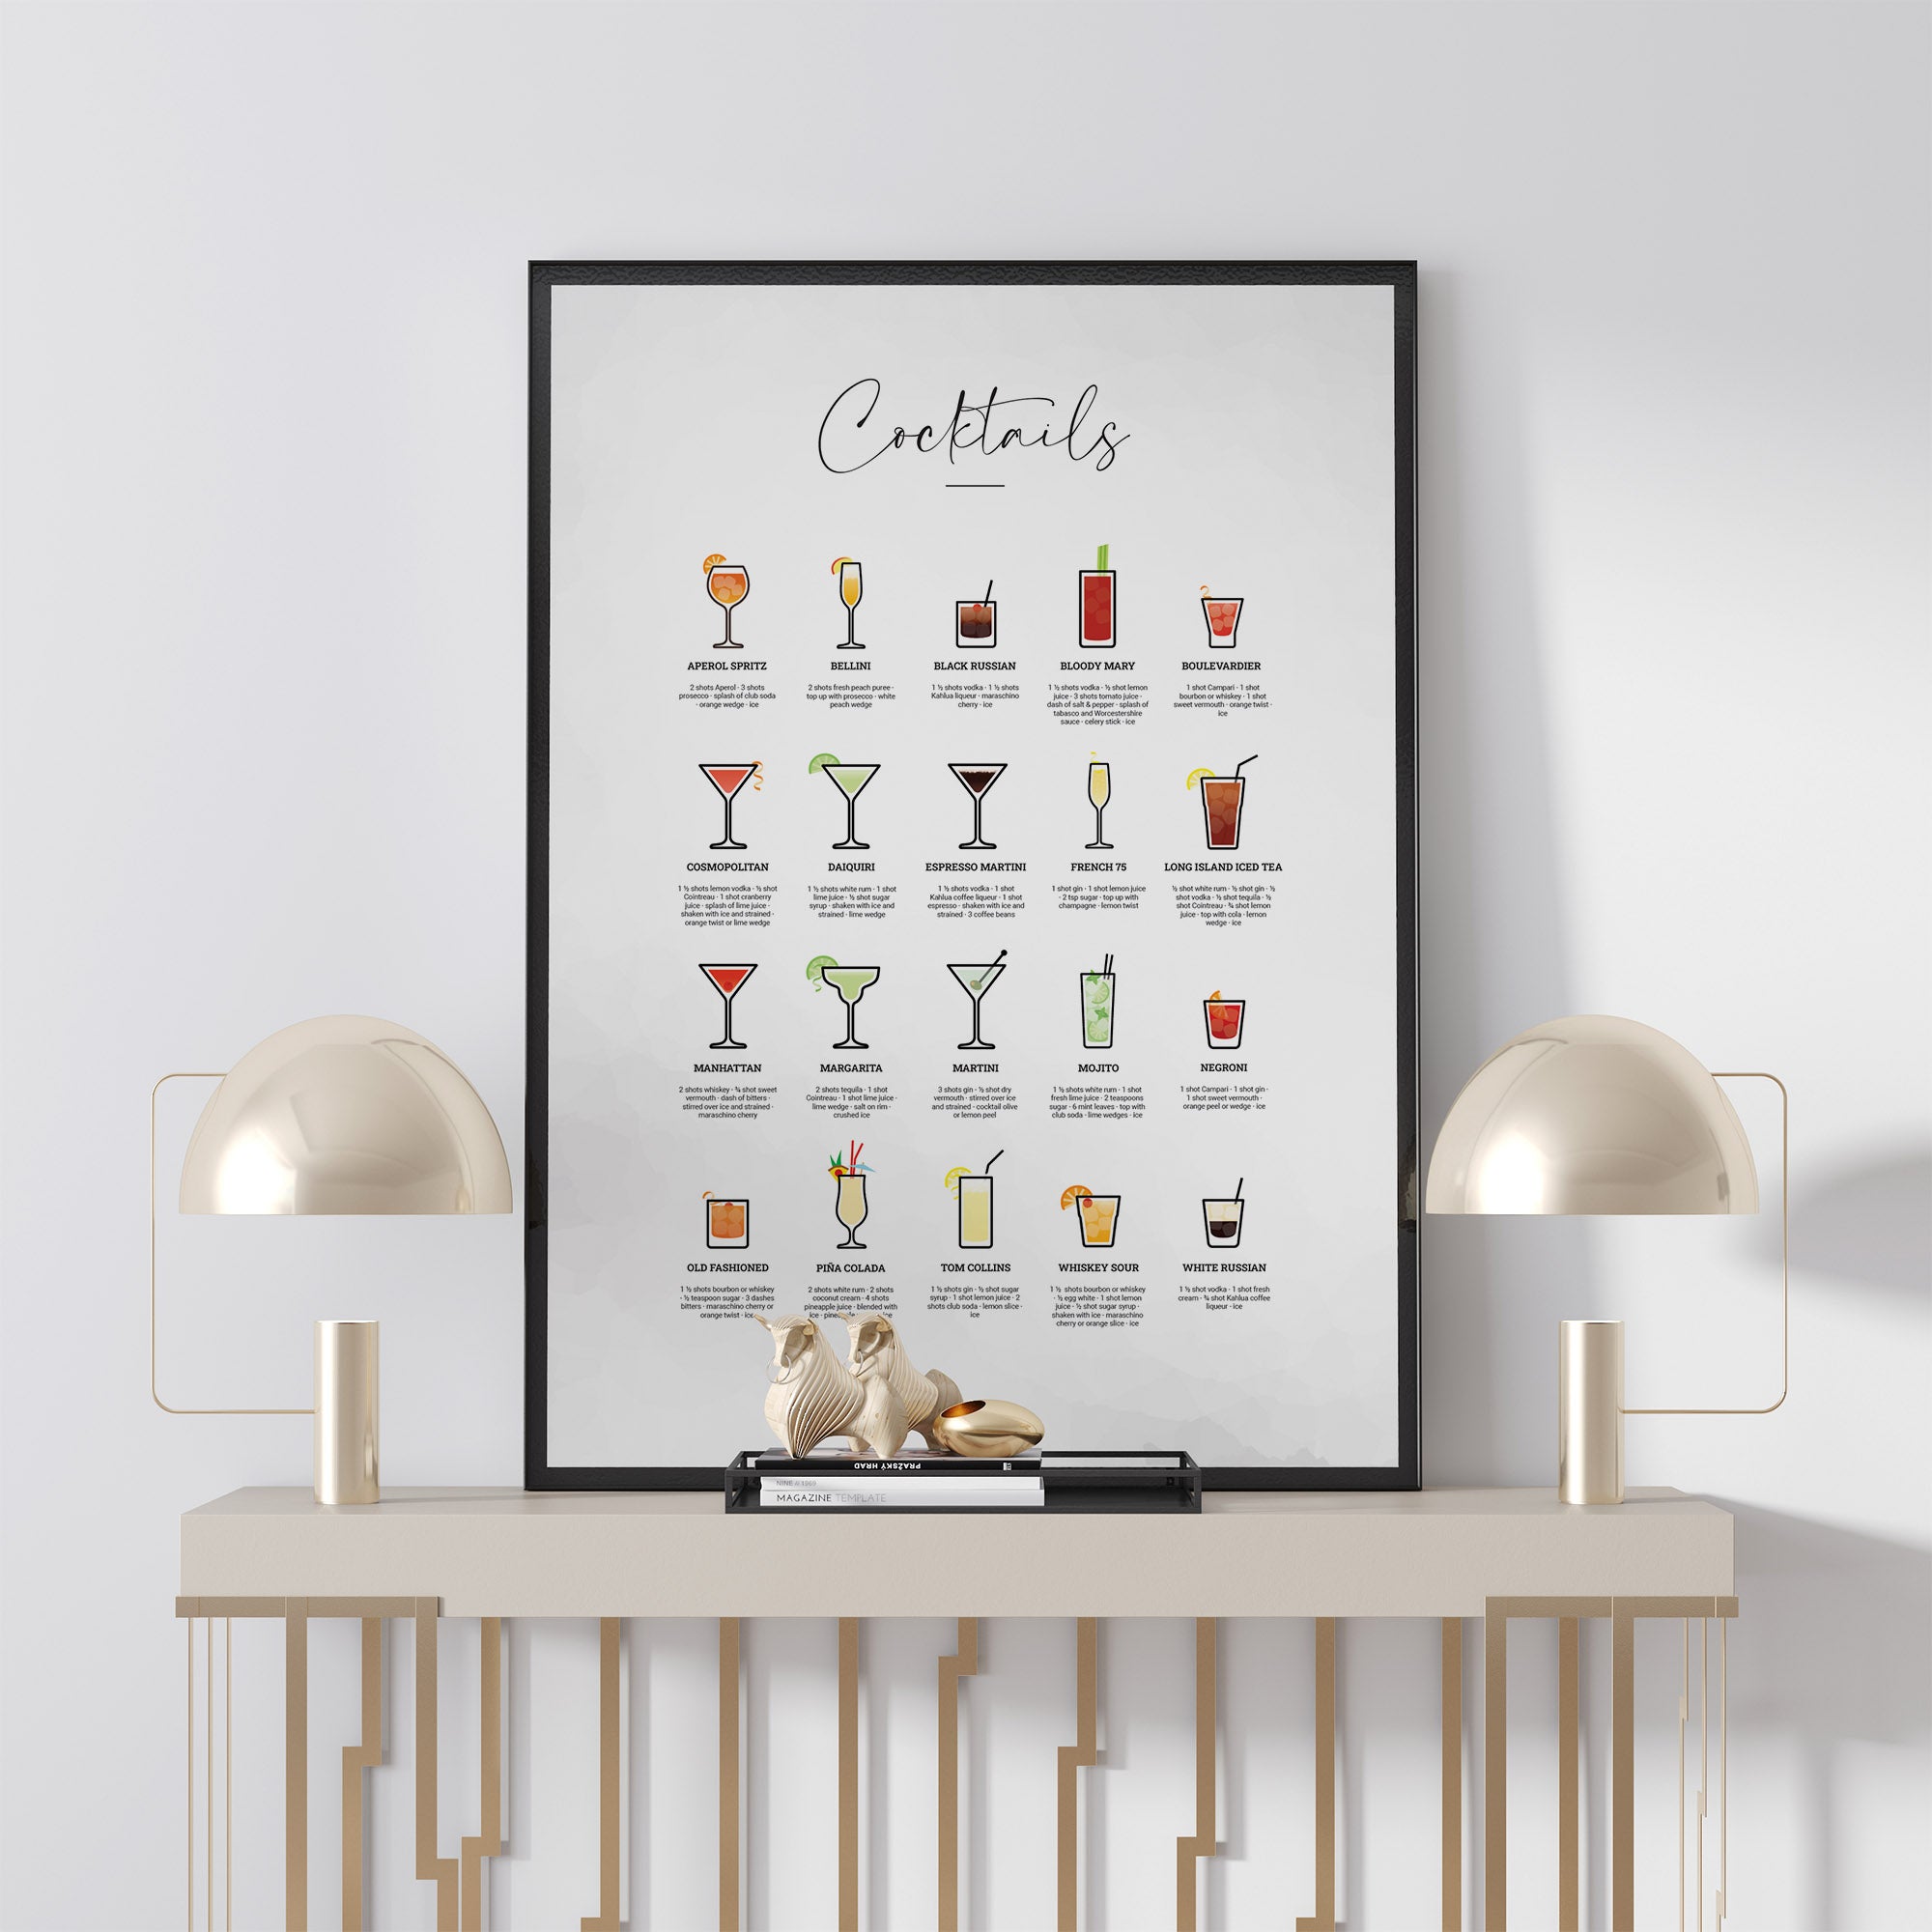 BAR CART DECOR, Gallery posted by Mar